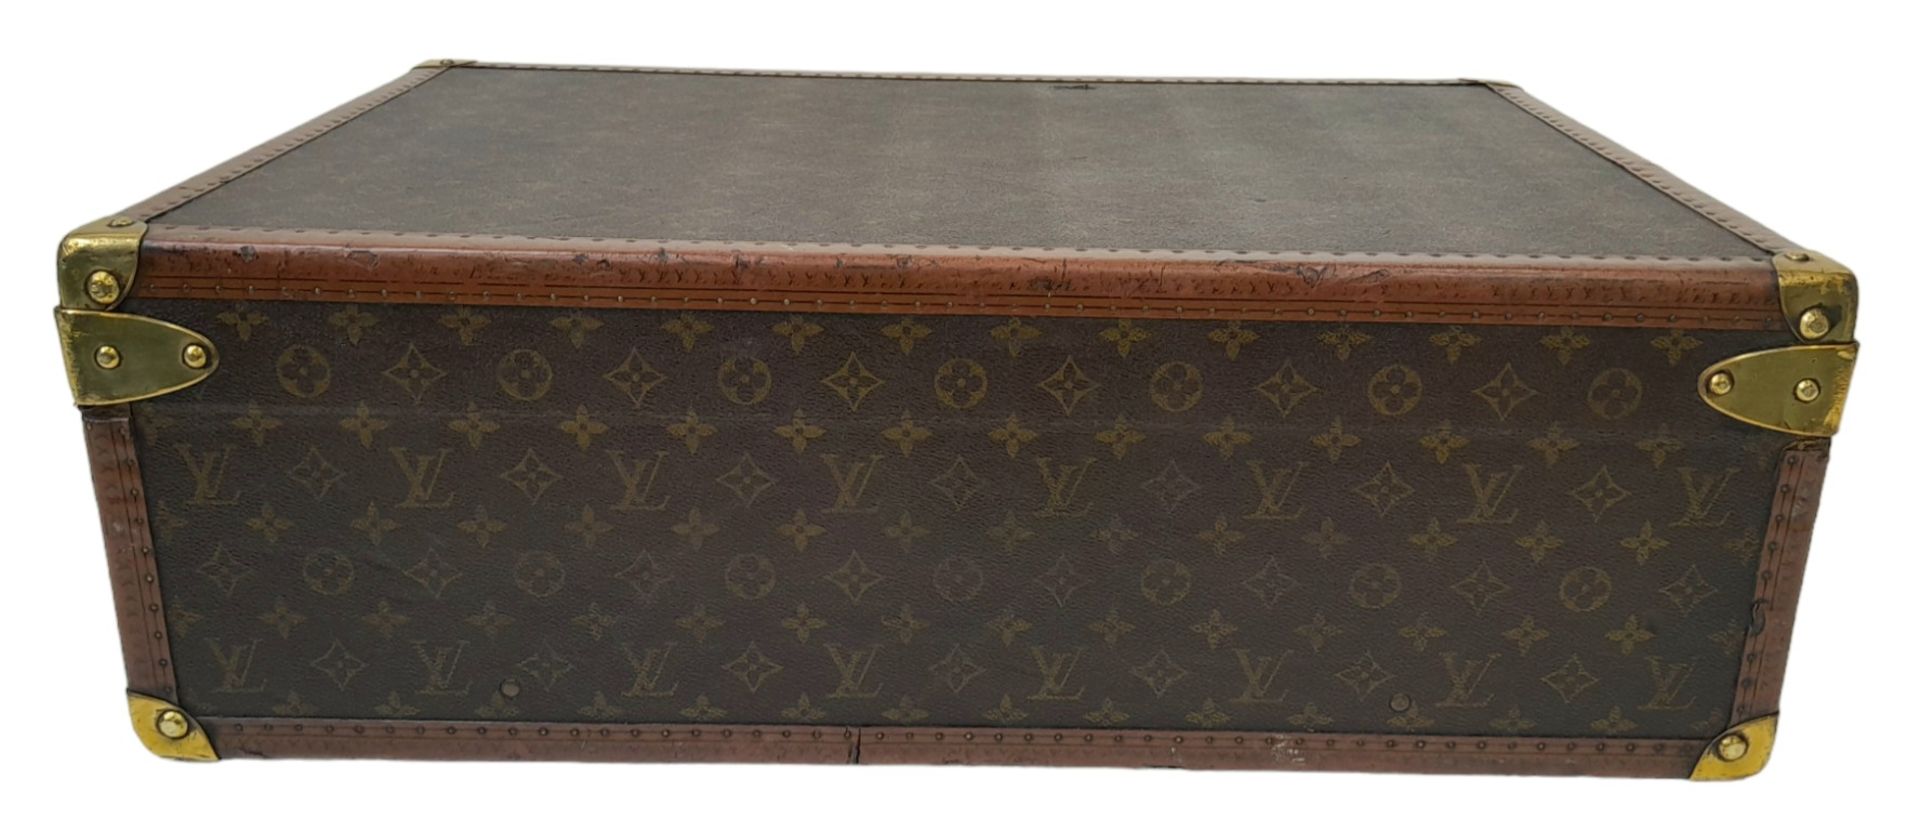 A Vintage Possibly Antique Louis Vuitton Trunk/Hard Suitcase. The smaller brother of Lot 38! - Bild 5 aus 13